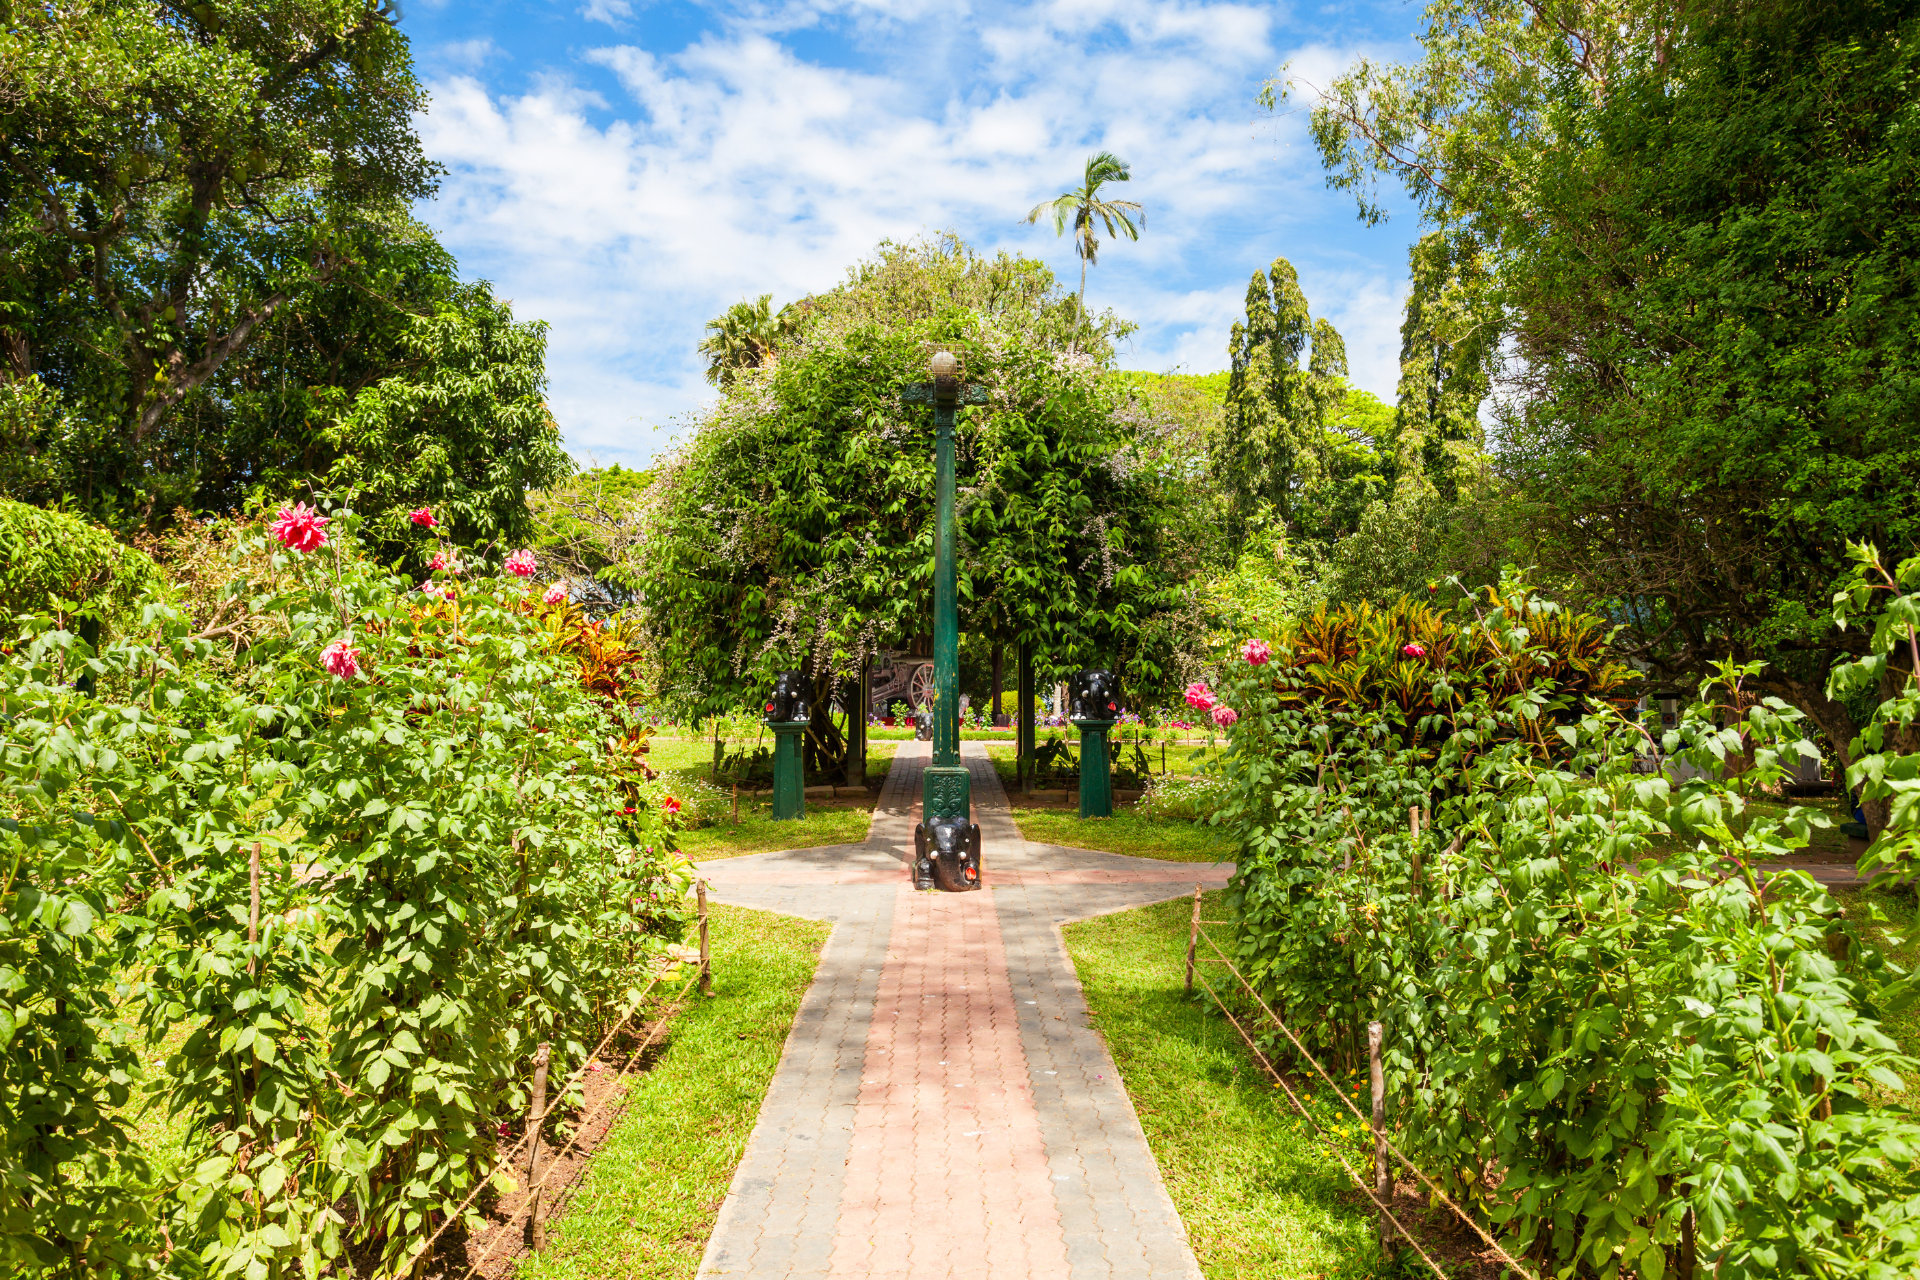 A pathway surrounded by leading through the gardens of Wales Park in Kandy, Sri Lanka